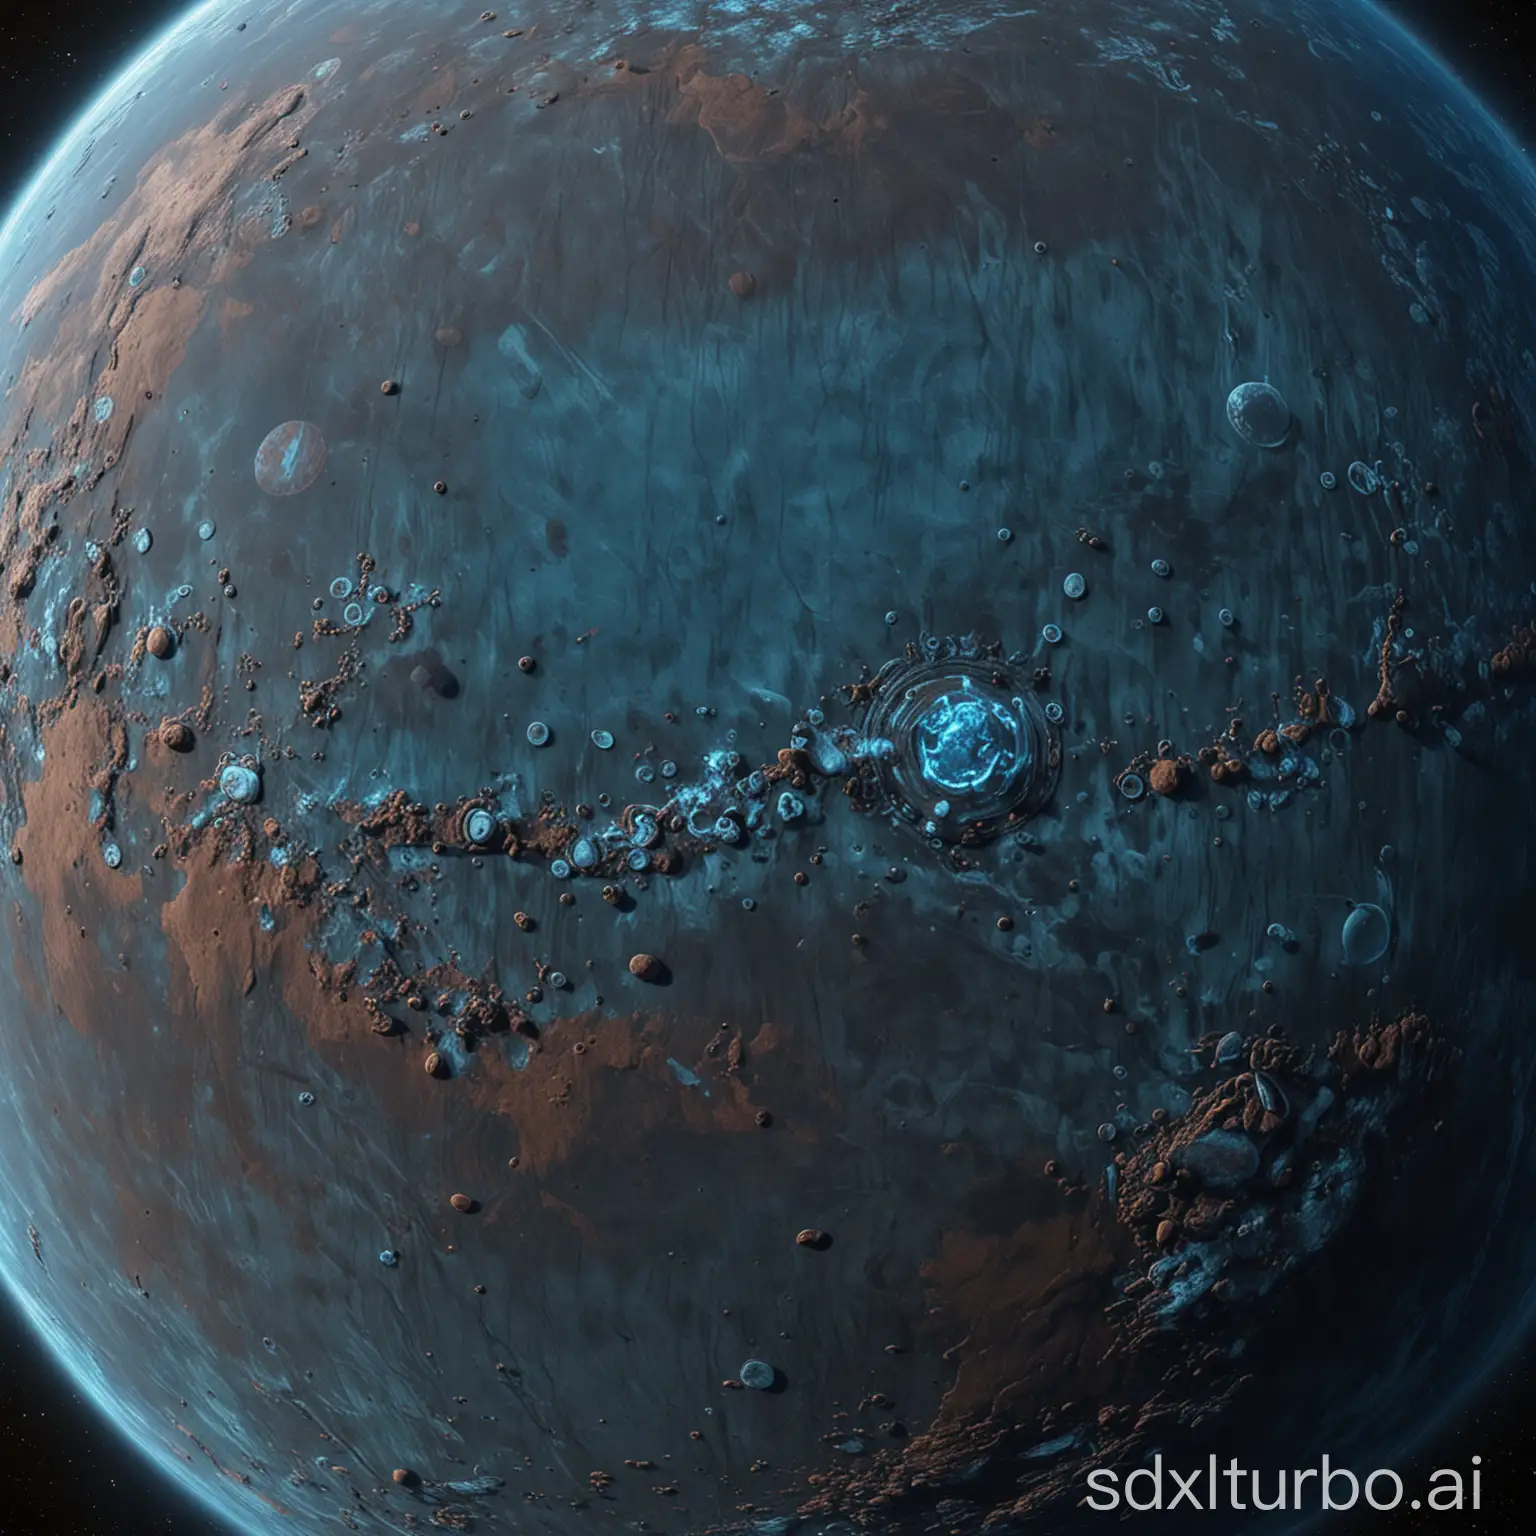 a flat blue gas planet texture, lot of details, texture cover the hole image